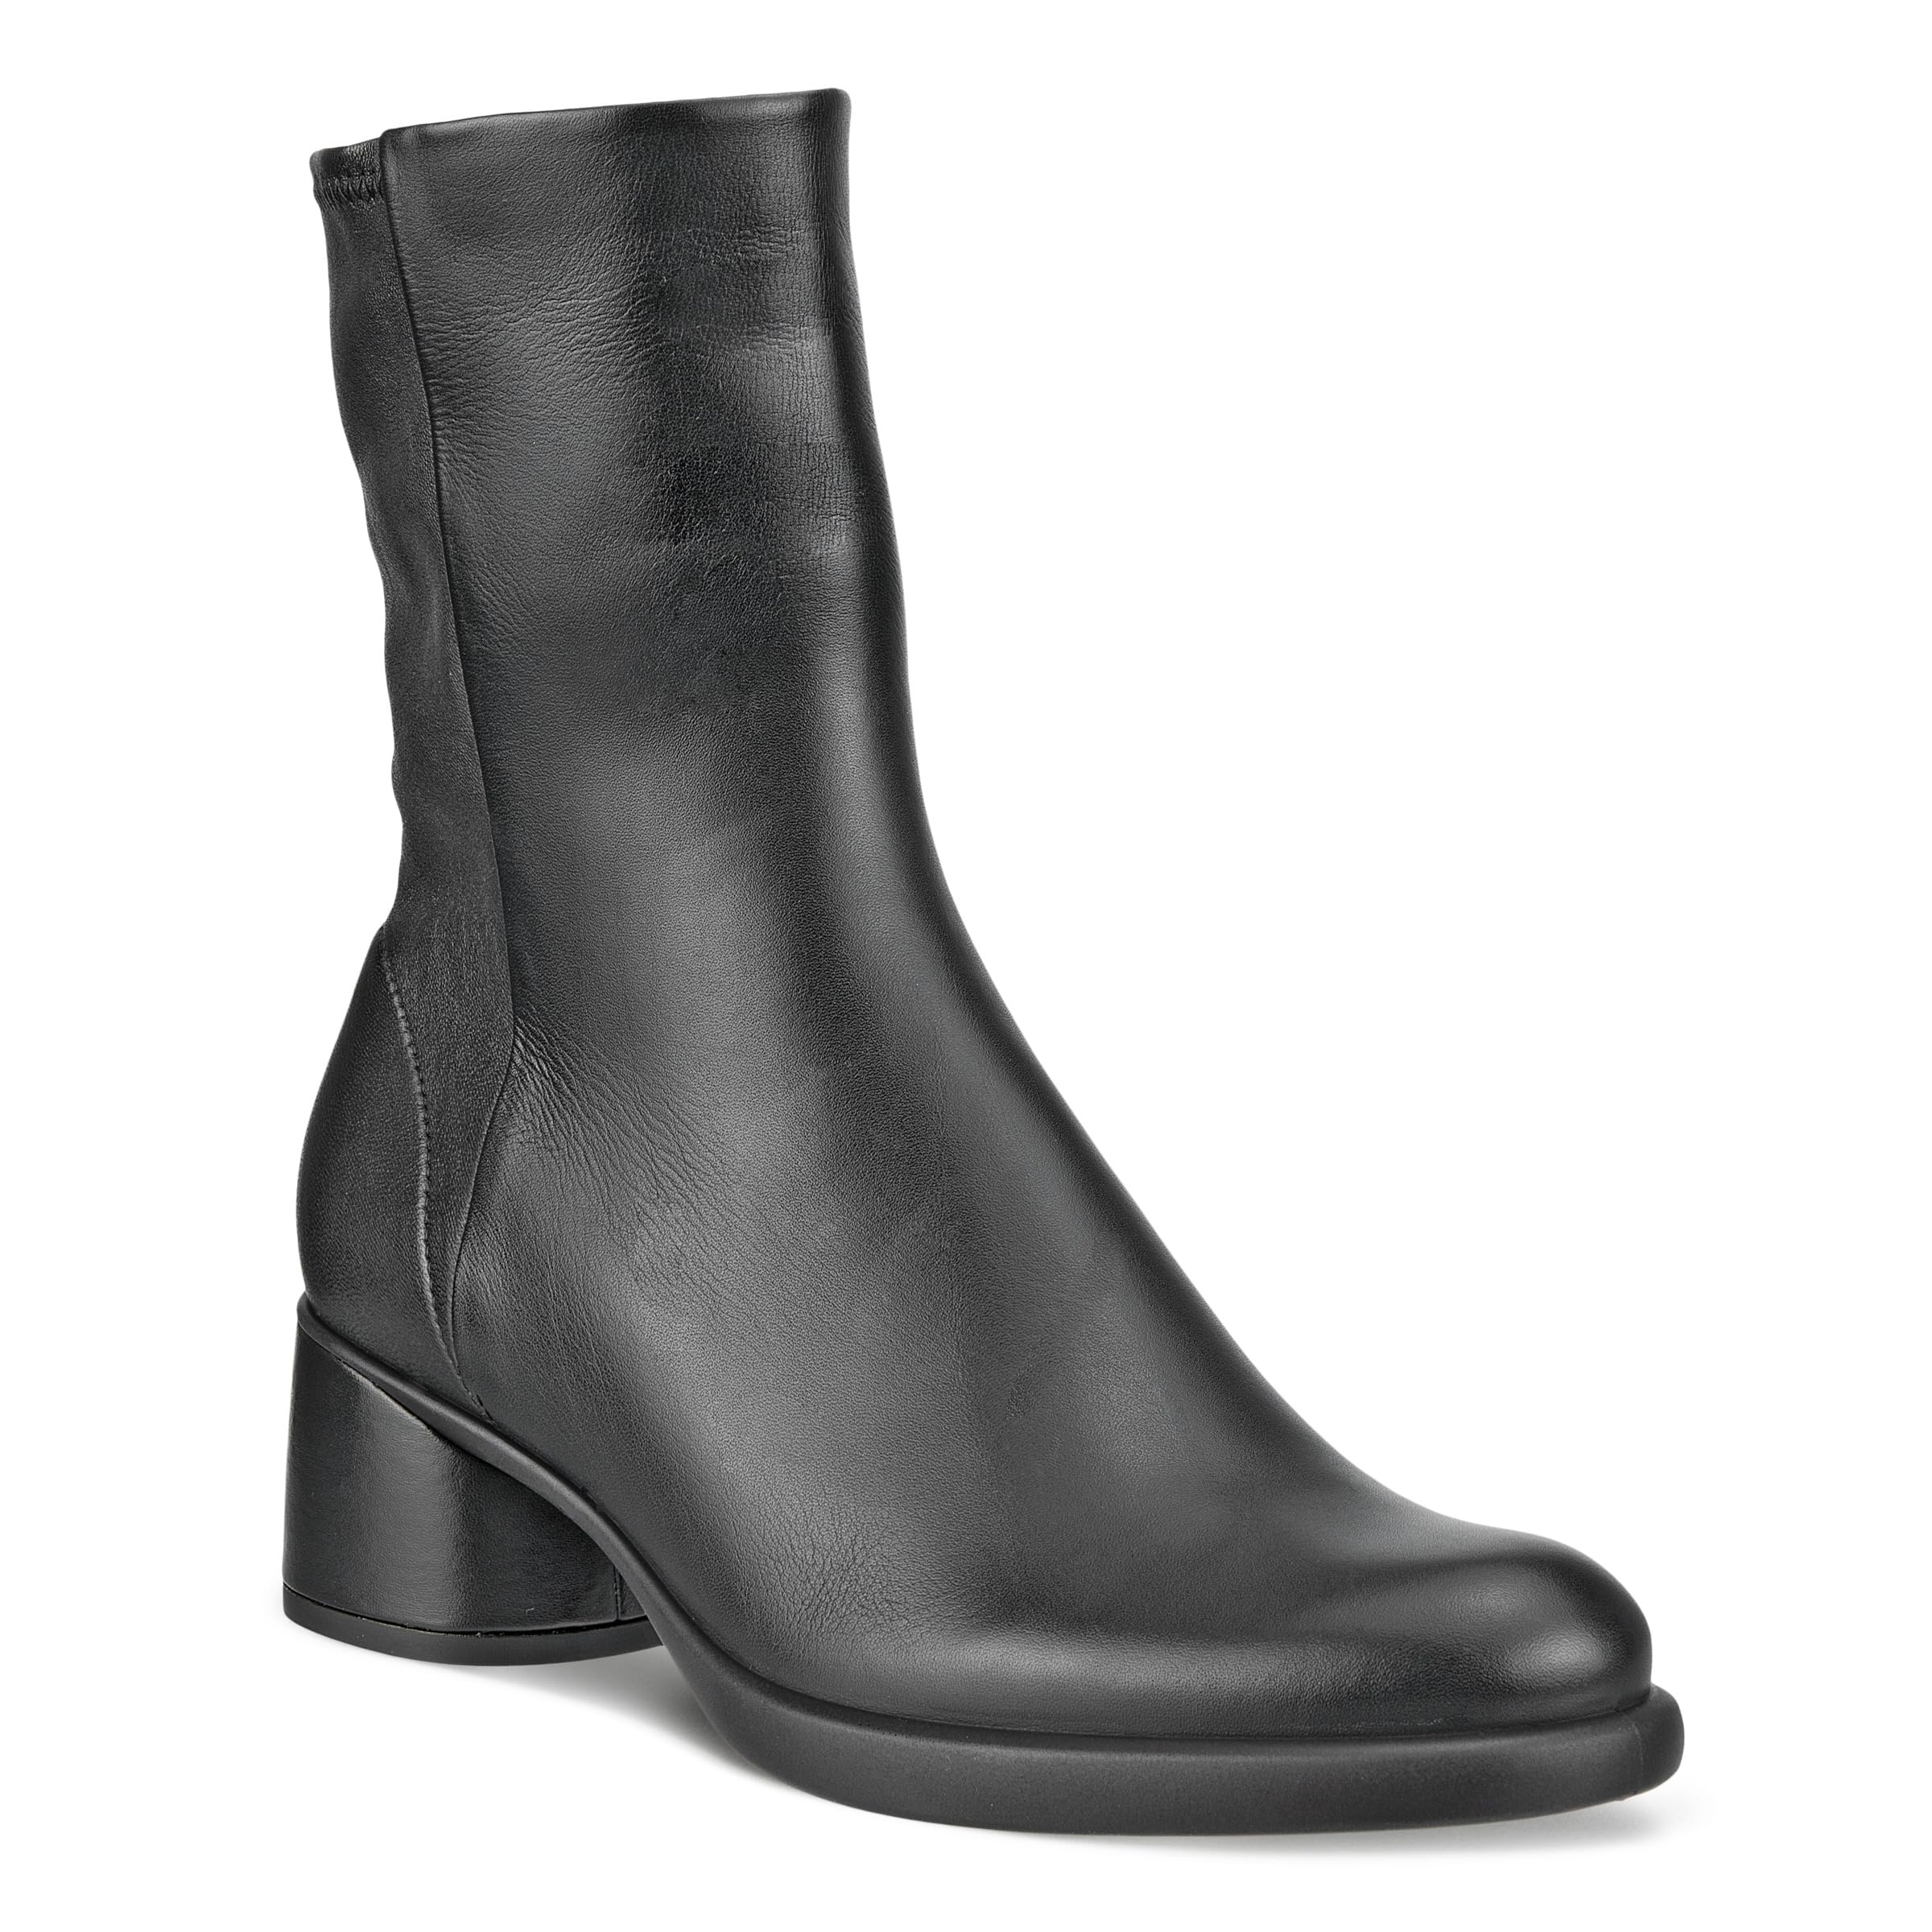 ECCO Women's Sculpted Luxury 35mm Ankle Boot